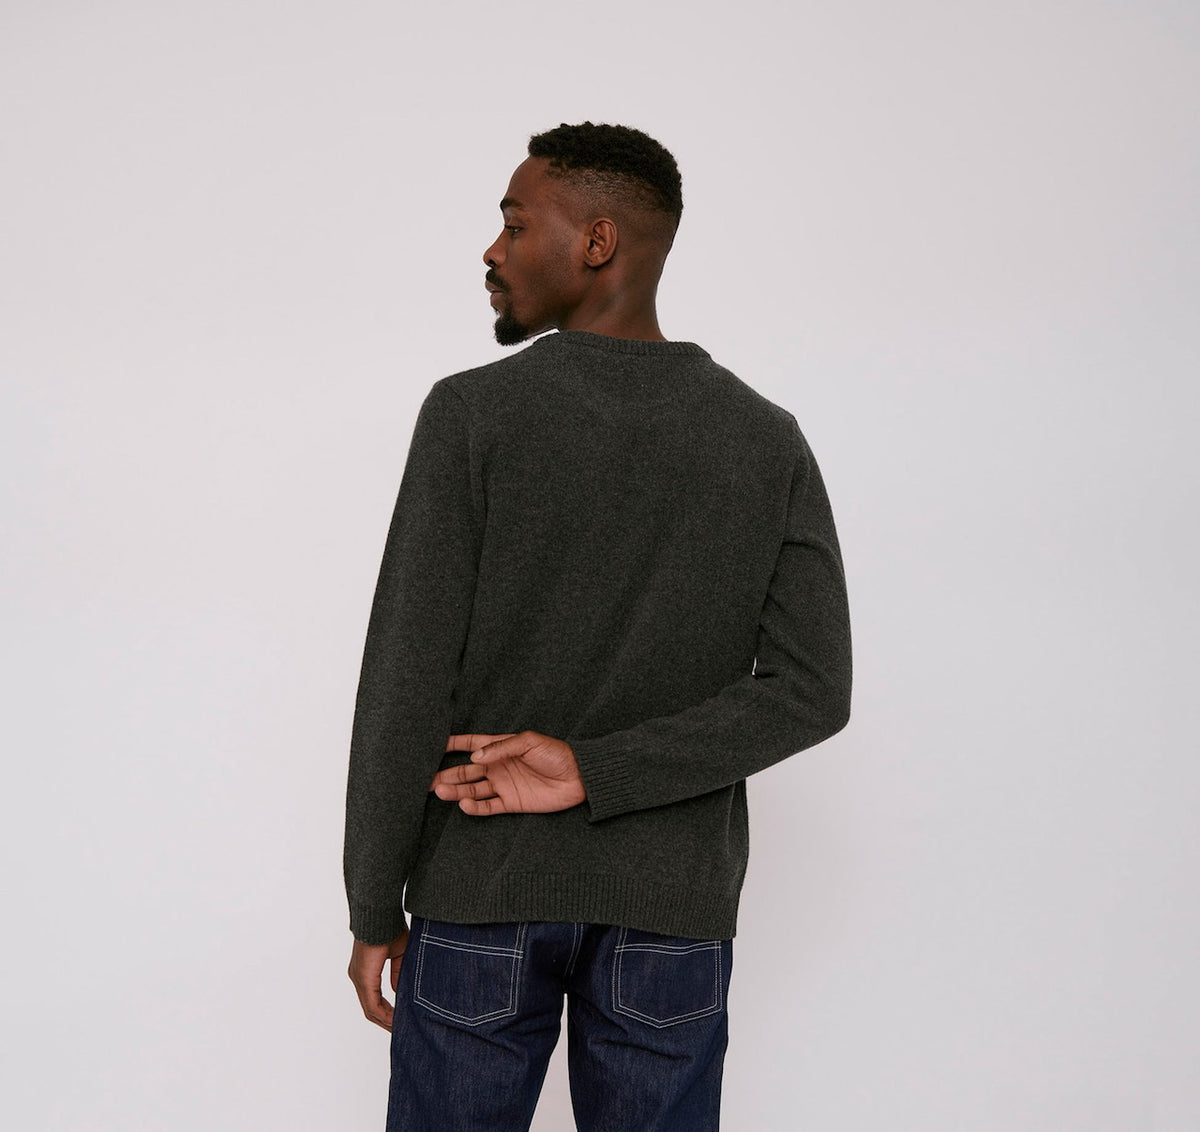 The back of a man wearing an Organic Basics Recycled Wool Knit Jumper – Charcoal Melange sweater and jeans.